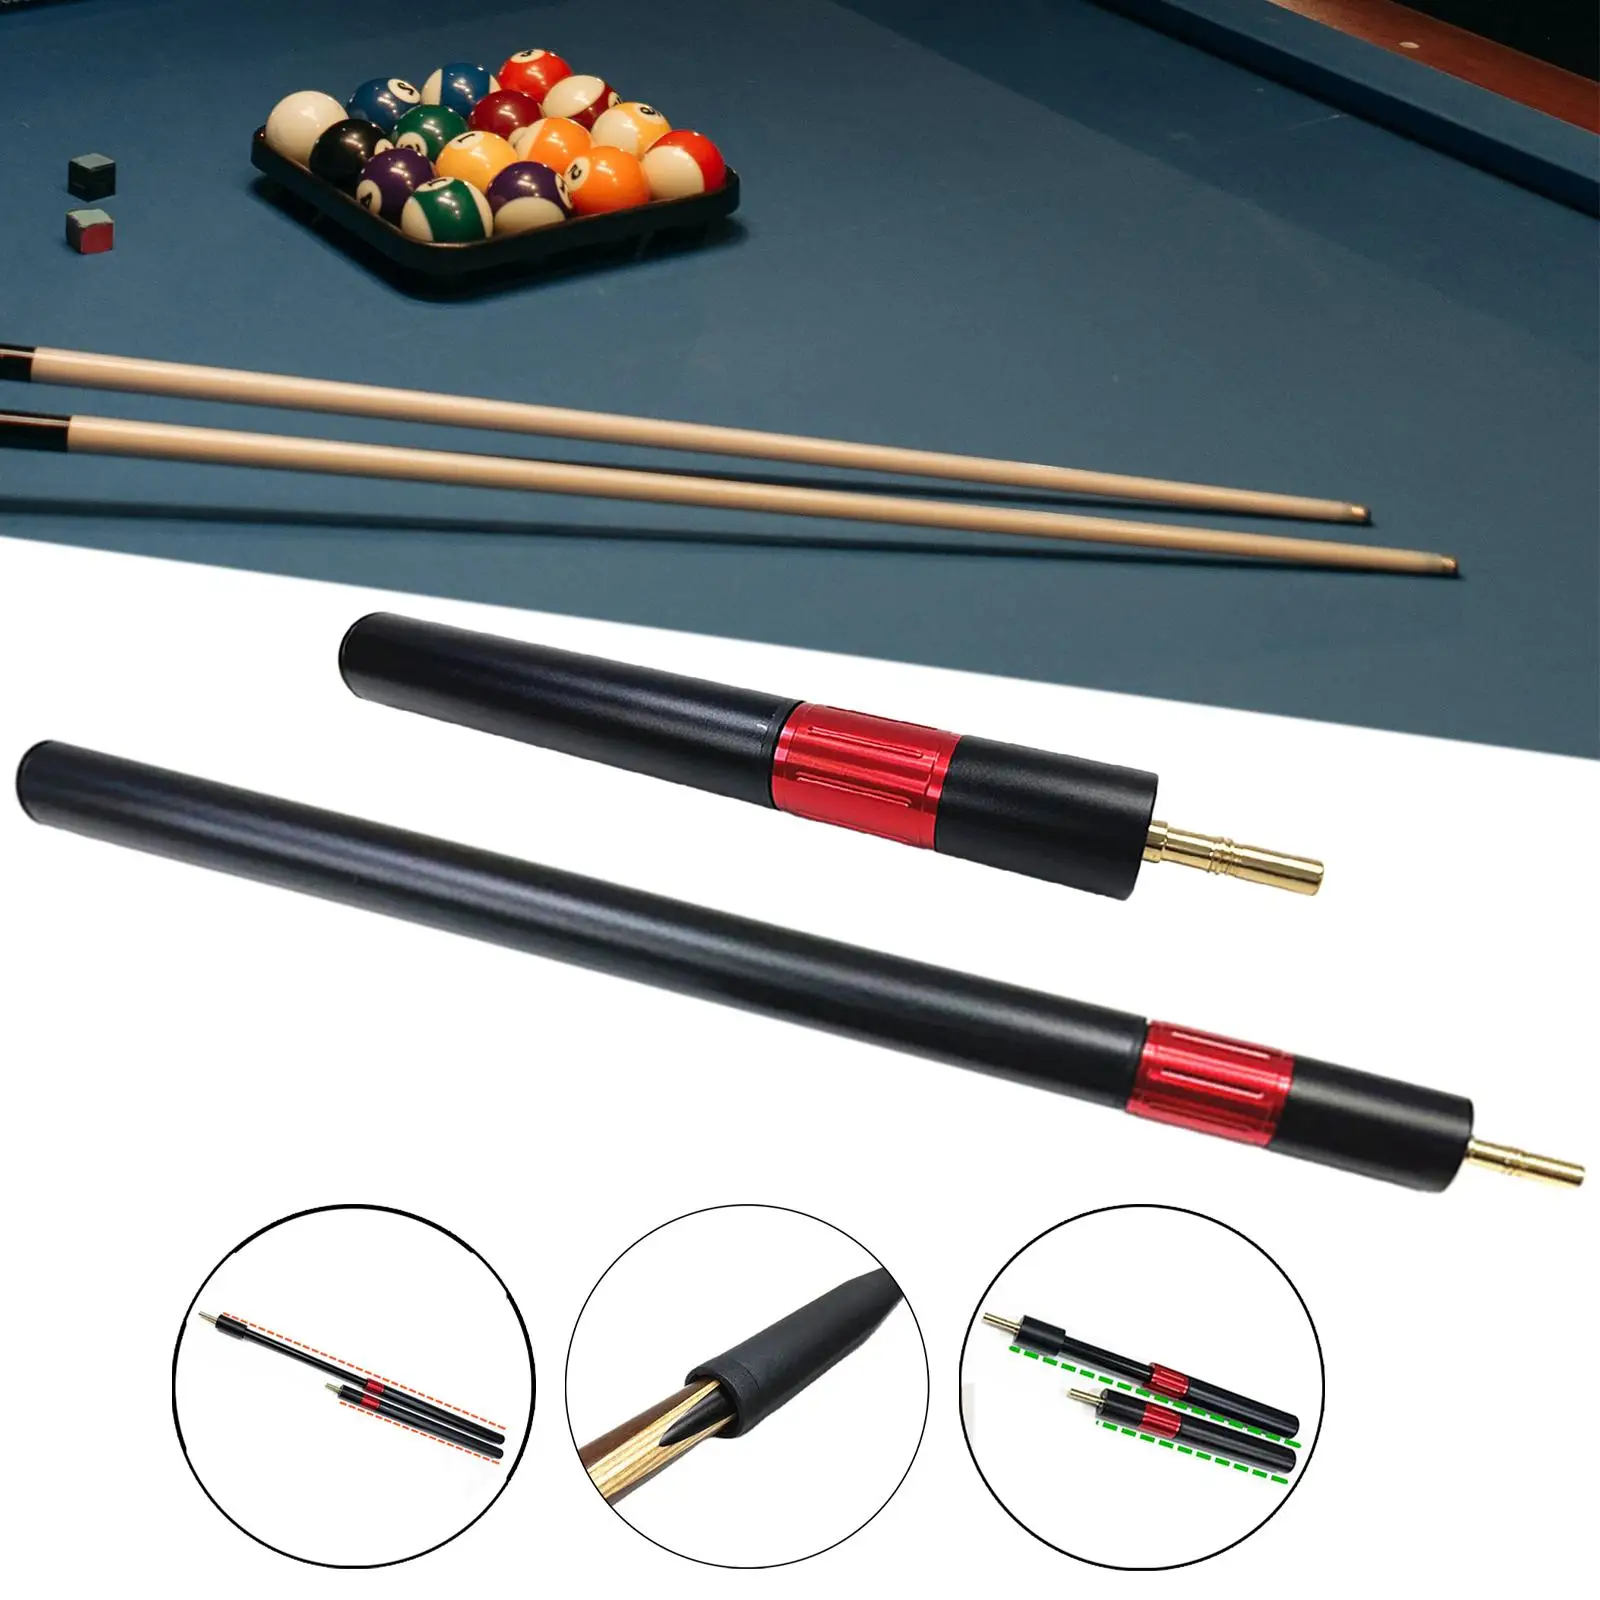 Billiards Cue Extension Pool Cue Stick Extension Cue Joint Accessories